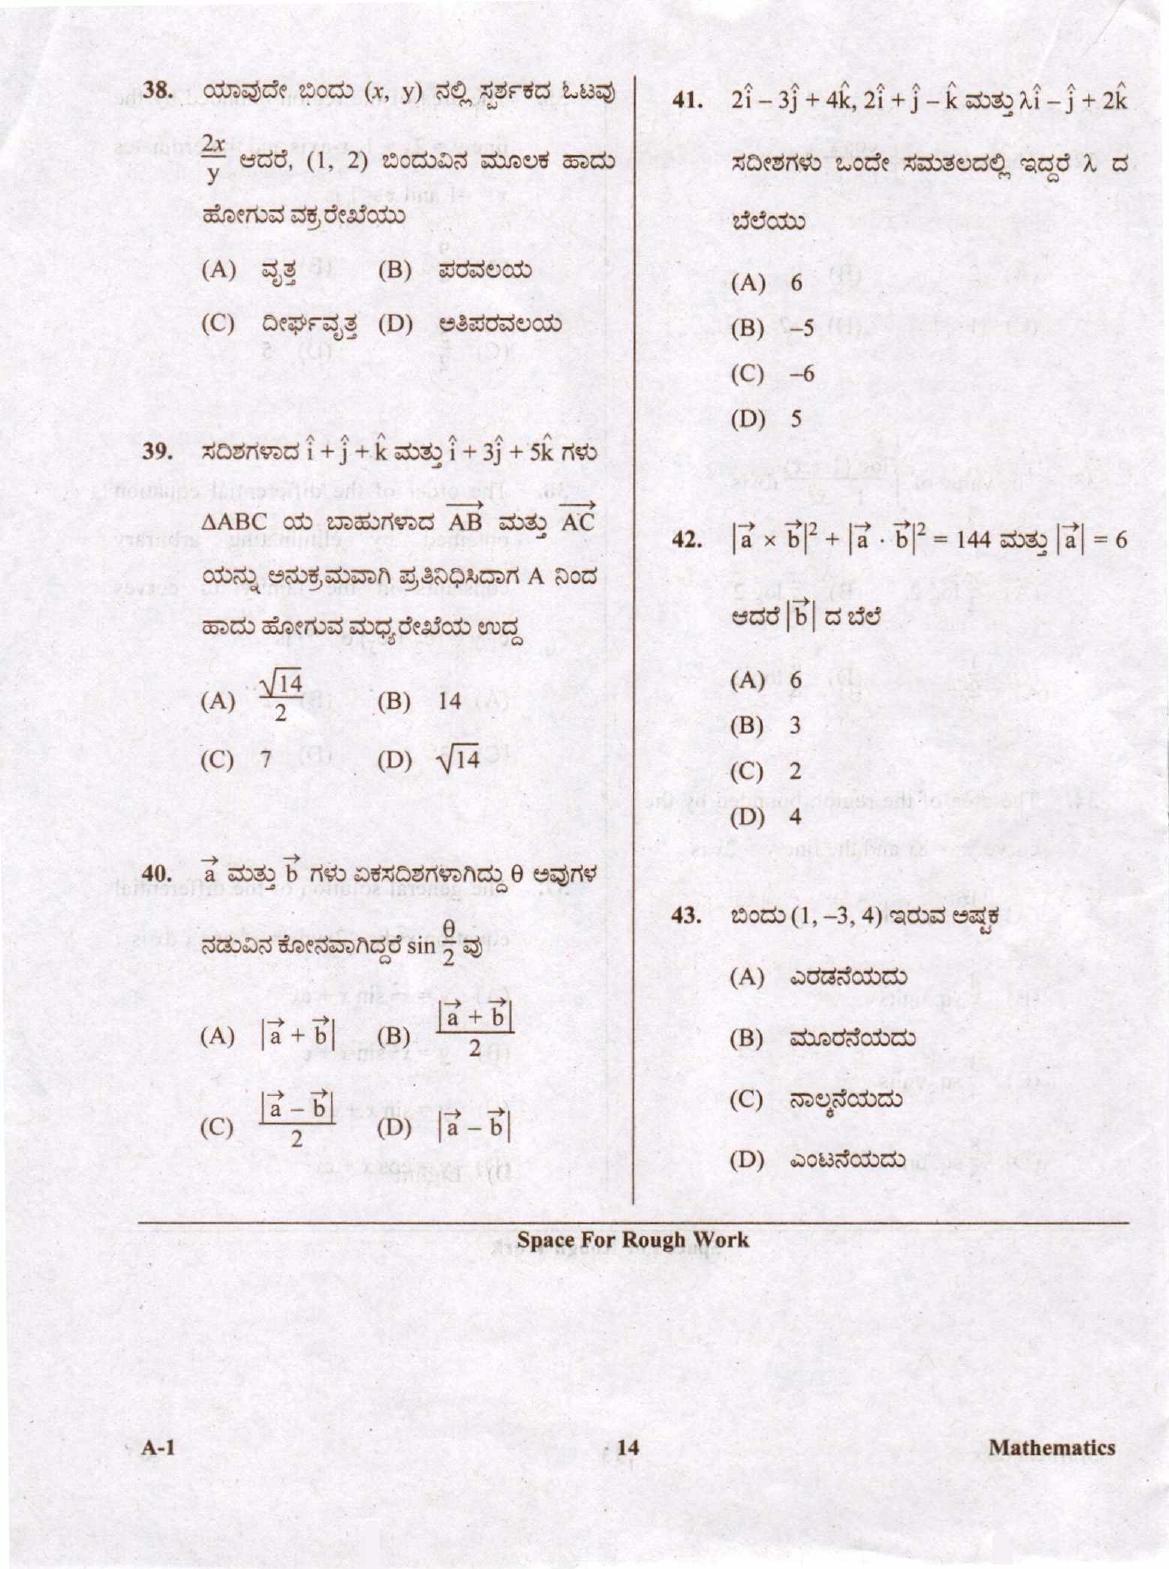 KCET Mathematics 2020 Question Papers - Page 14